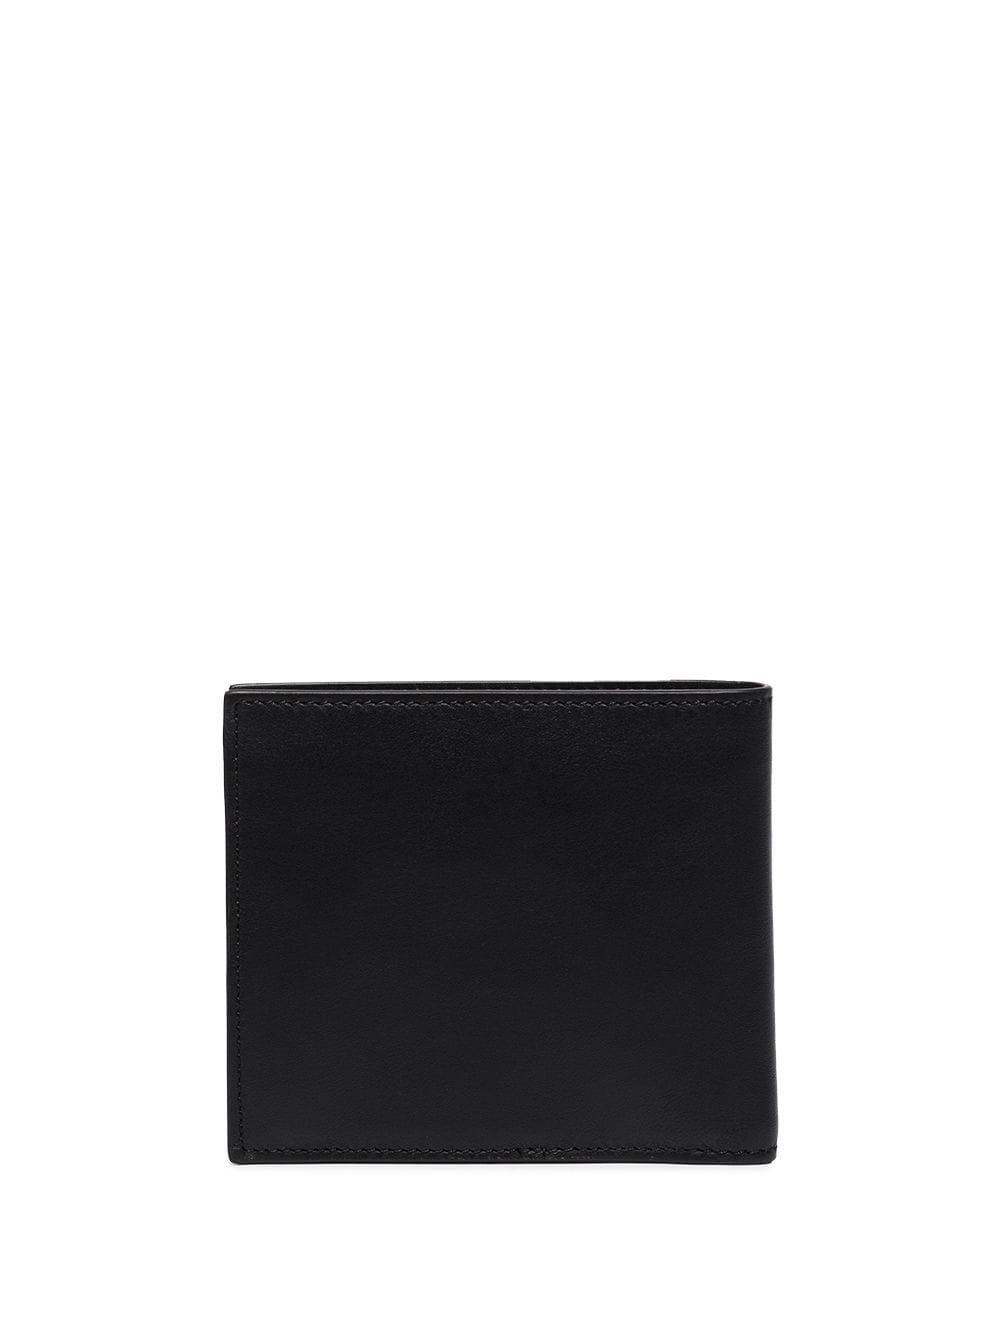 Off-White c/o Virgil Abloh Leather Quote Bifold Wallet in Black/White 